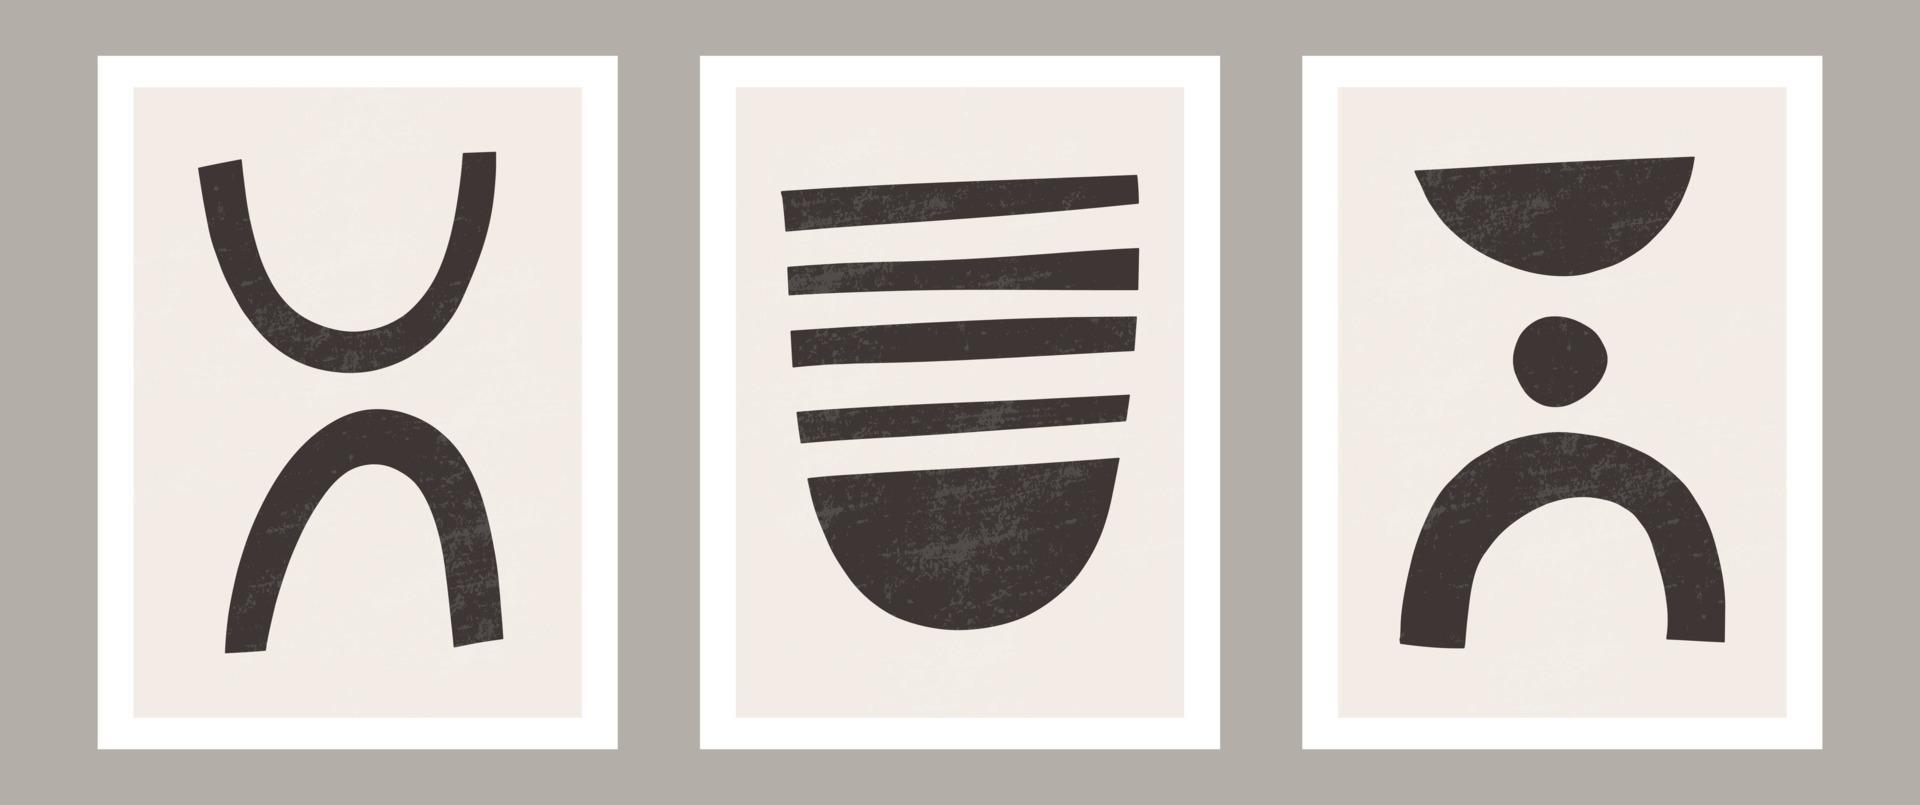 Trendy contemporary Abstract wall art, Set of 3 boho art prints, Minimal black shapes on beige. Creative Mid-century geometric minimalist artistic hand painted composition. Posters for wall decor vector